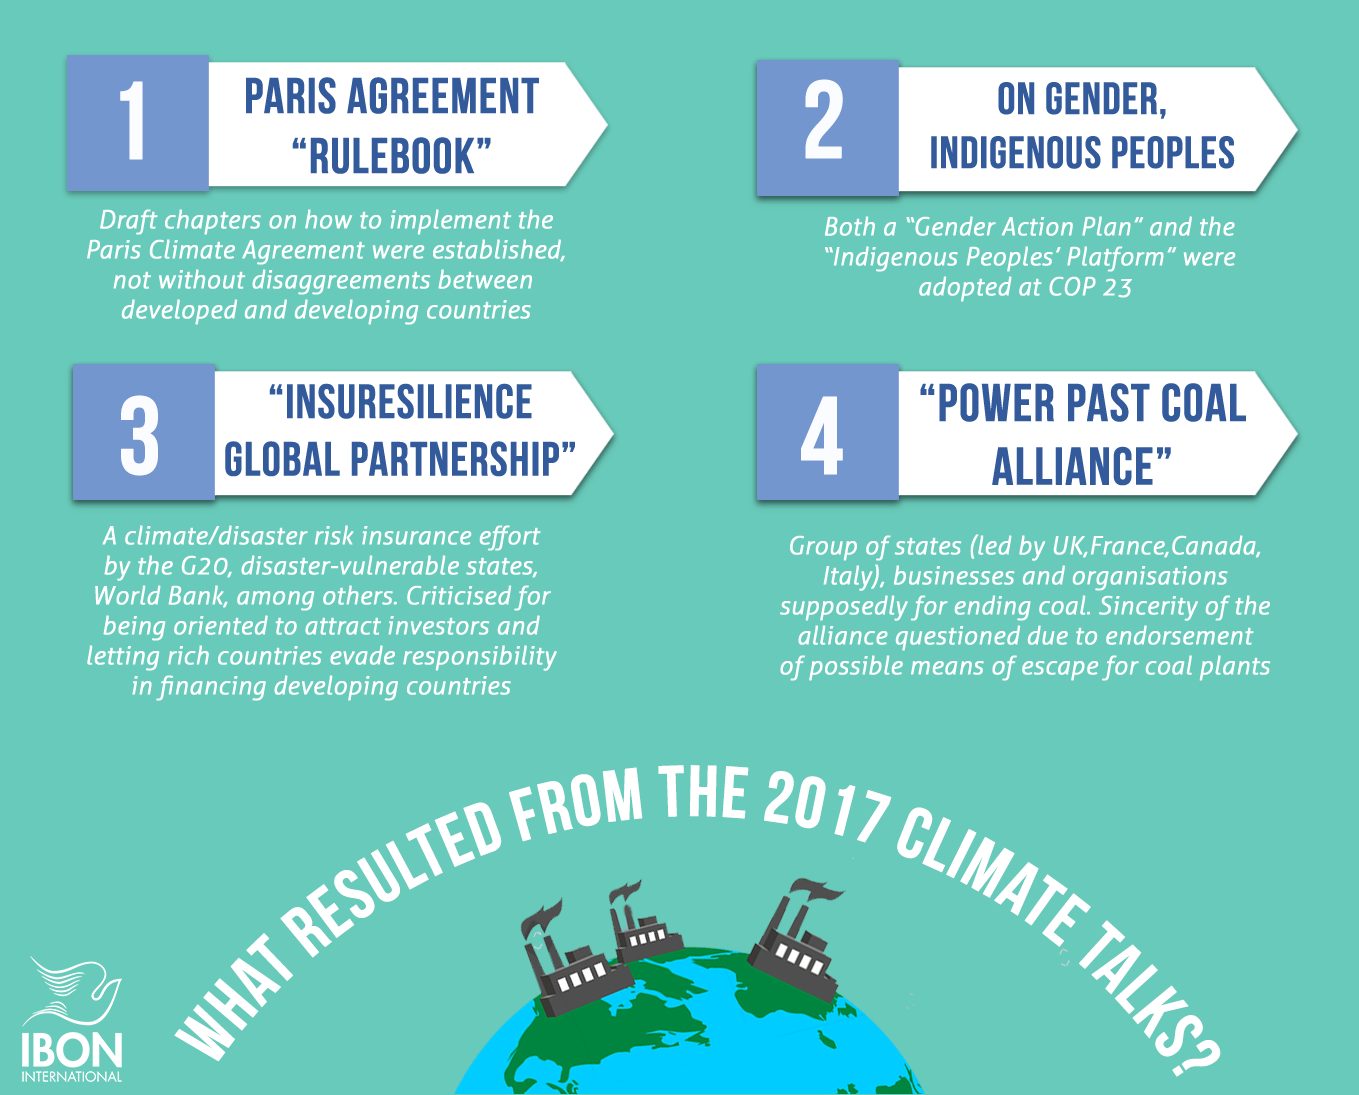 What resulted from the 2017 climate talks?